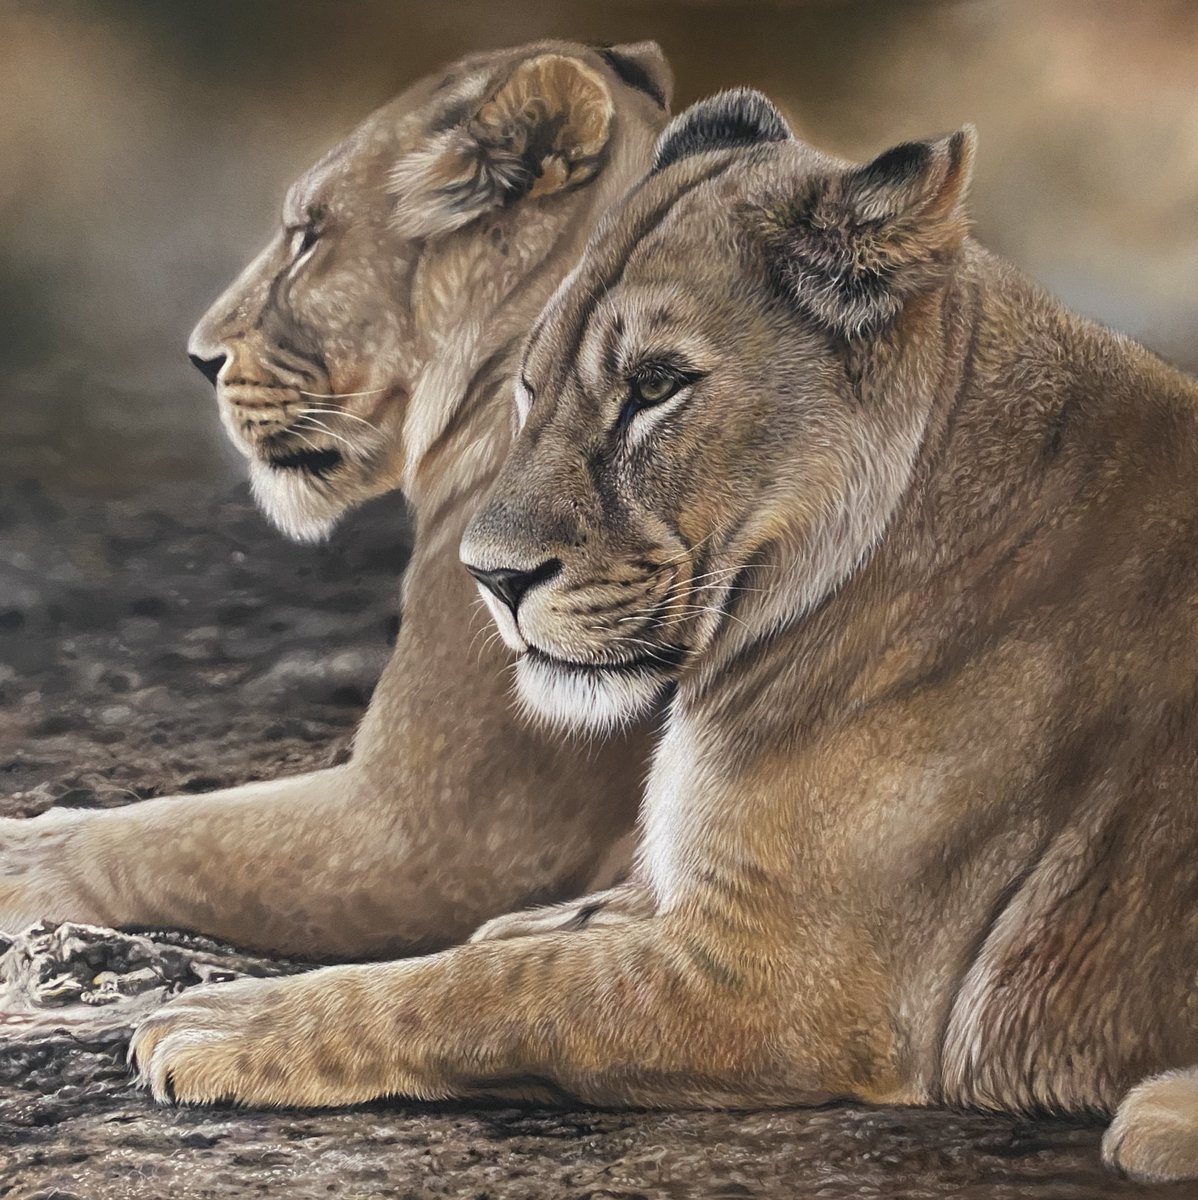 ‘Side by Side’ my NEW lionesses pastel drawing….available now

julierhodes.com

#lionesses #lionessart #bigcatart #drawinganimals #pastels #softpastelpainting #pastelpencils #catdrawing #drawingartists #drawing #drawrealistic